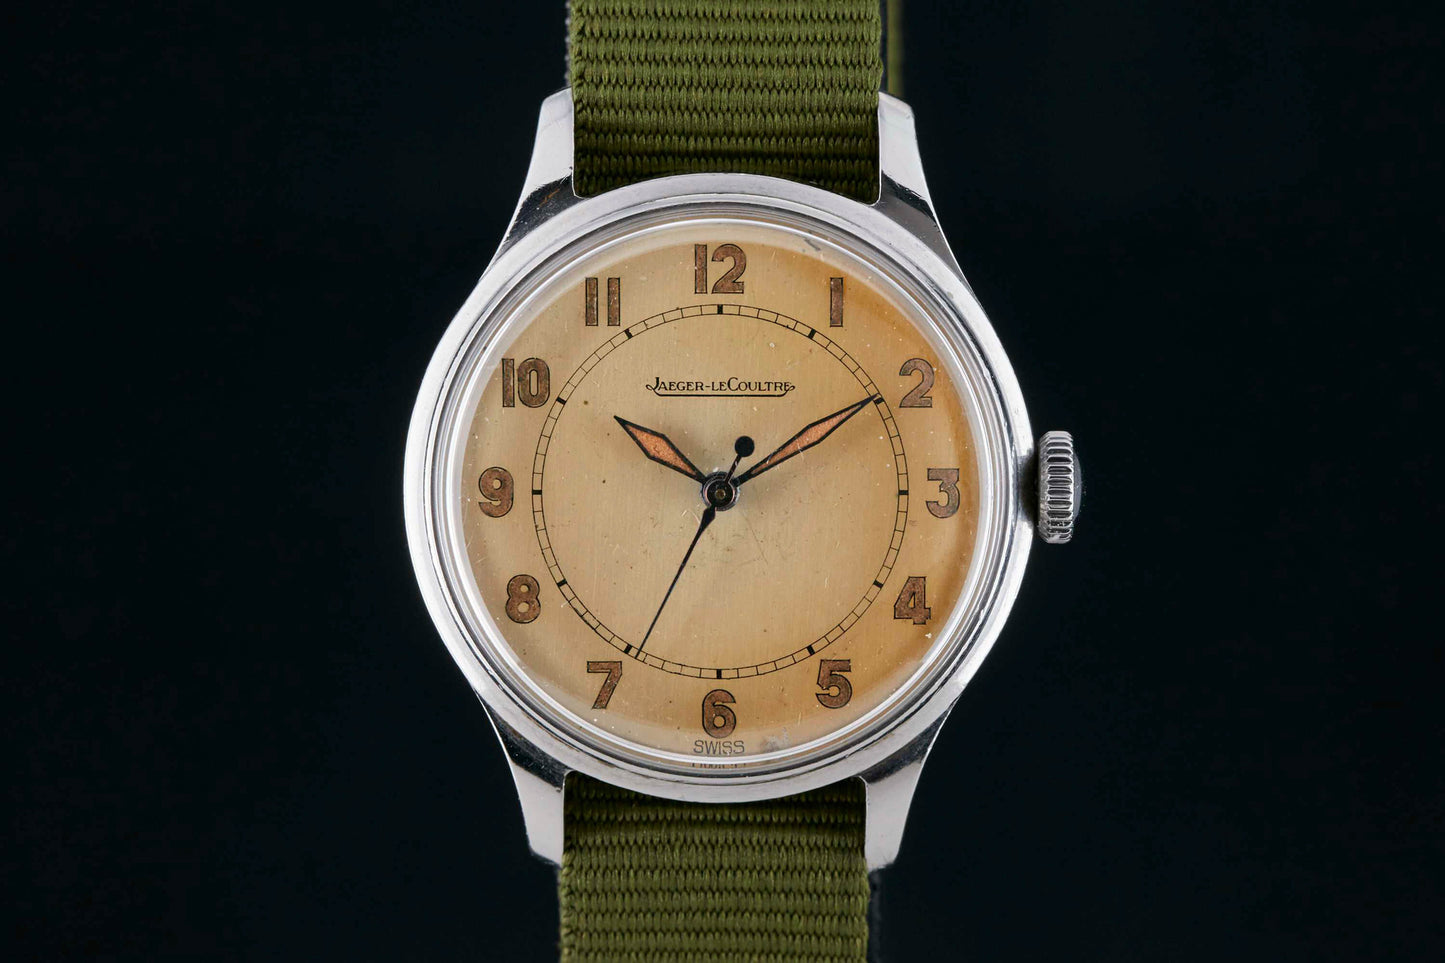 Jaeger LeCoultre Reference 159